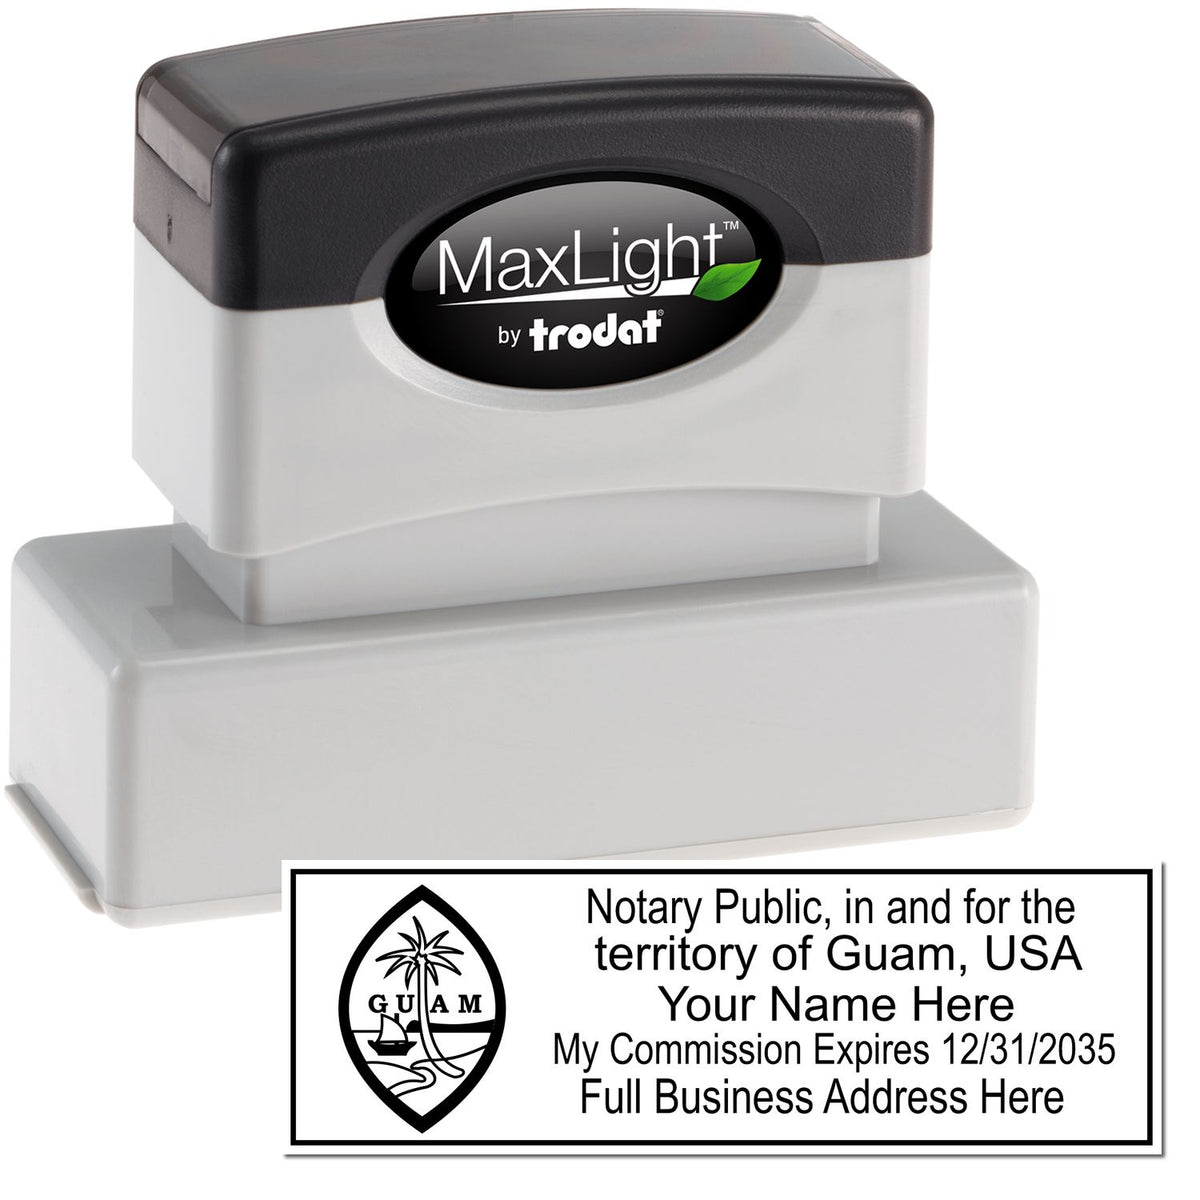 The main image for the MaxLight Premium Pre-Inked Guam Rectangular Notarial Stamp depicting a sample of the imprint and electronic files